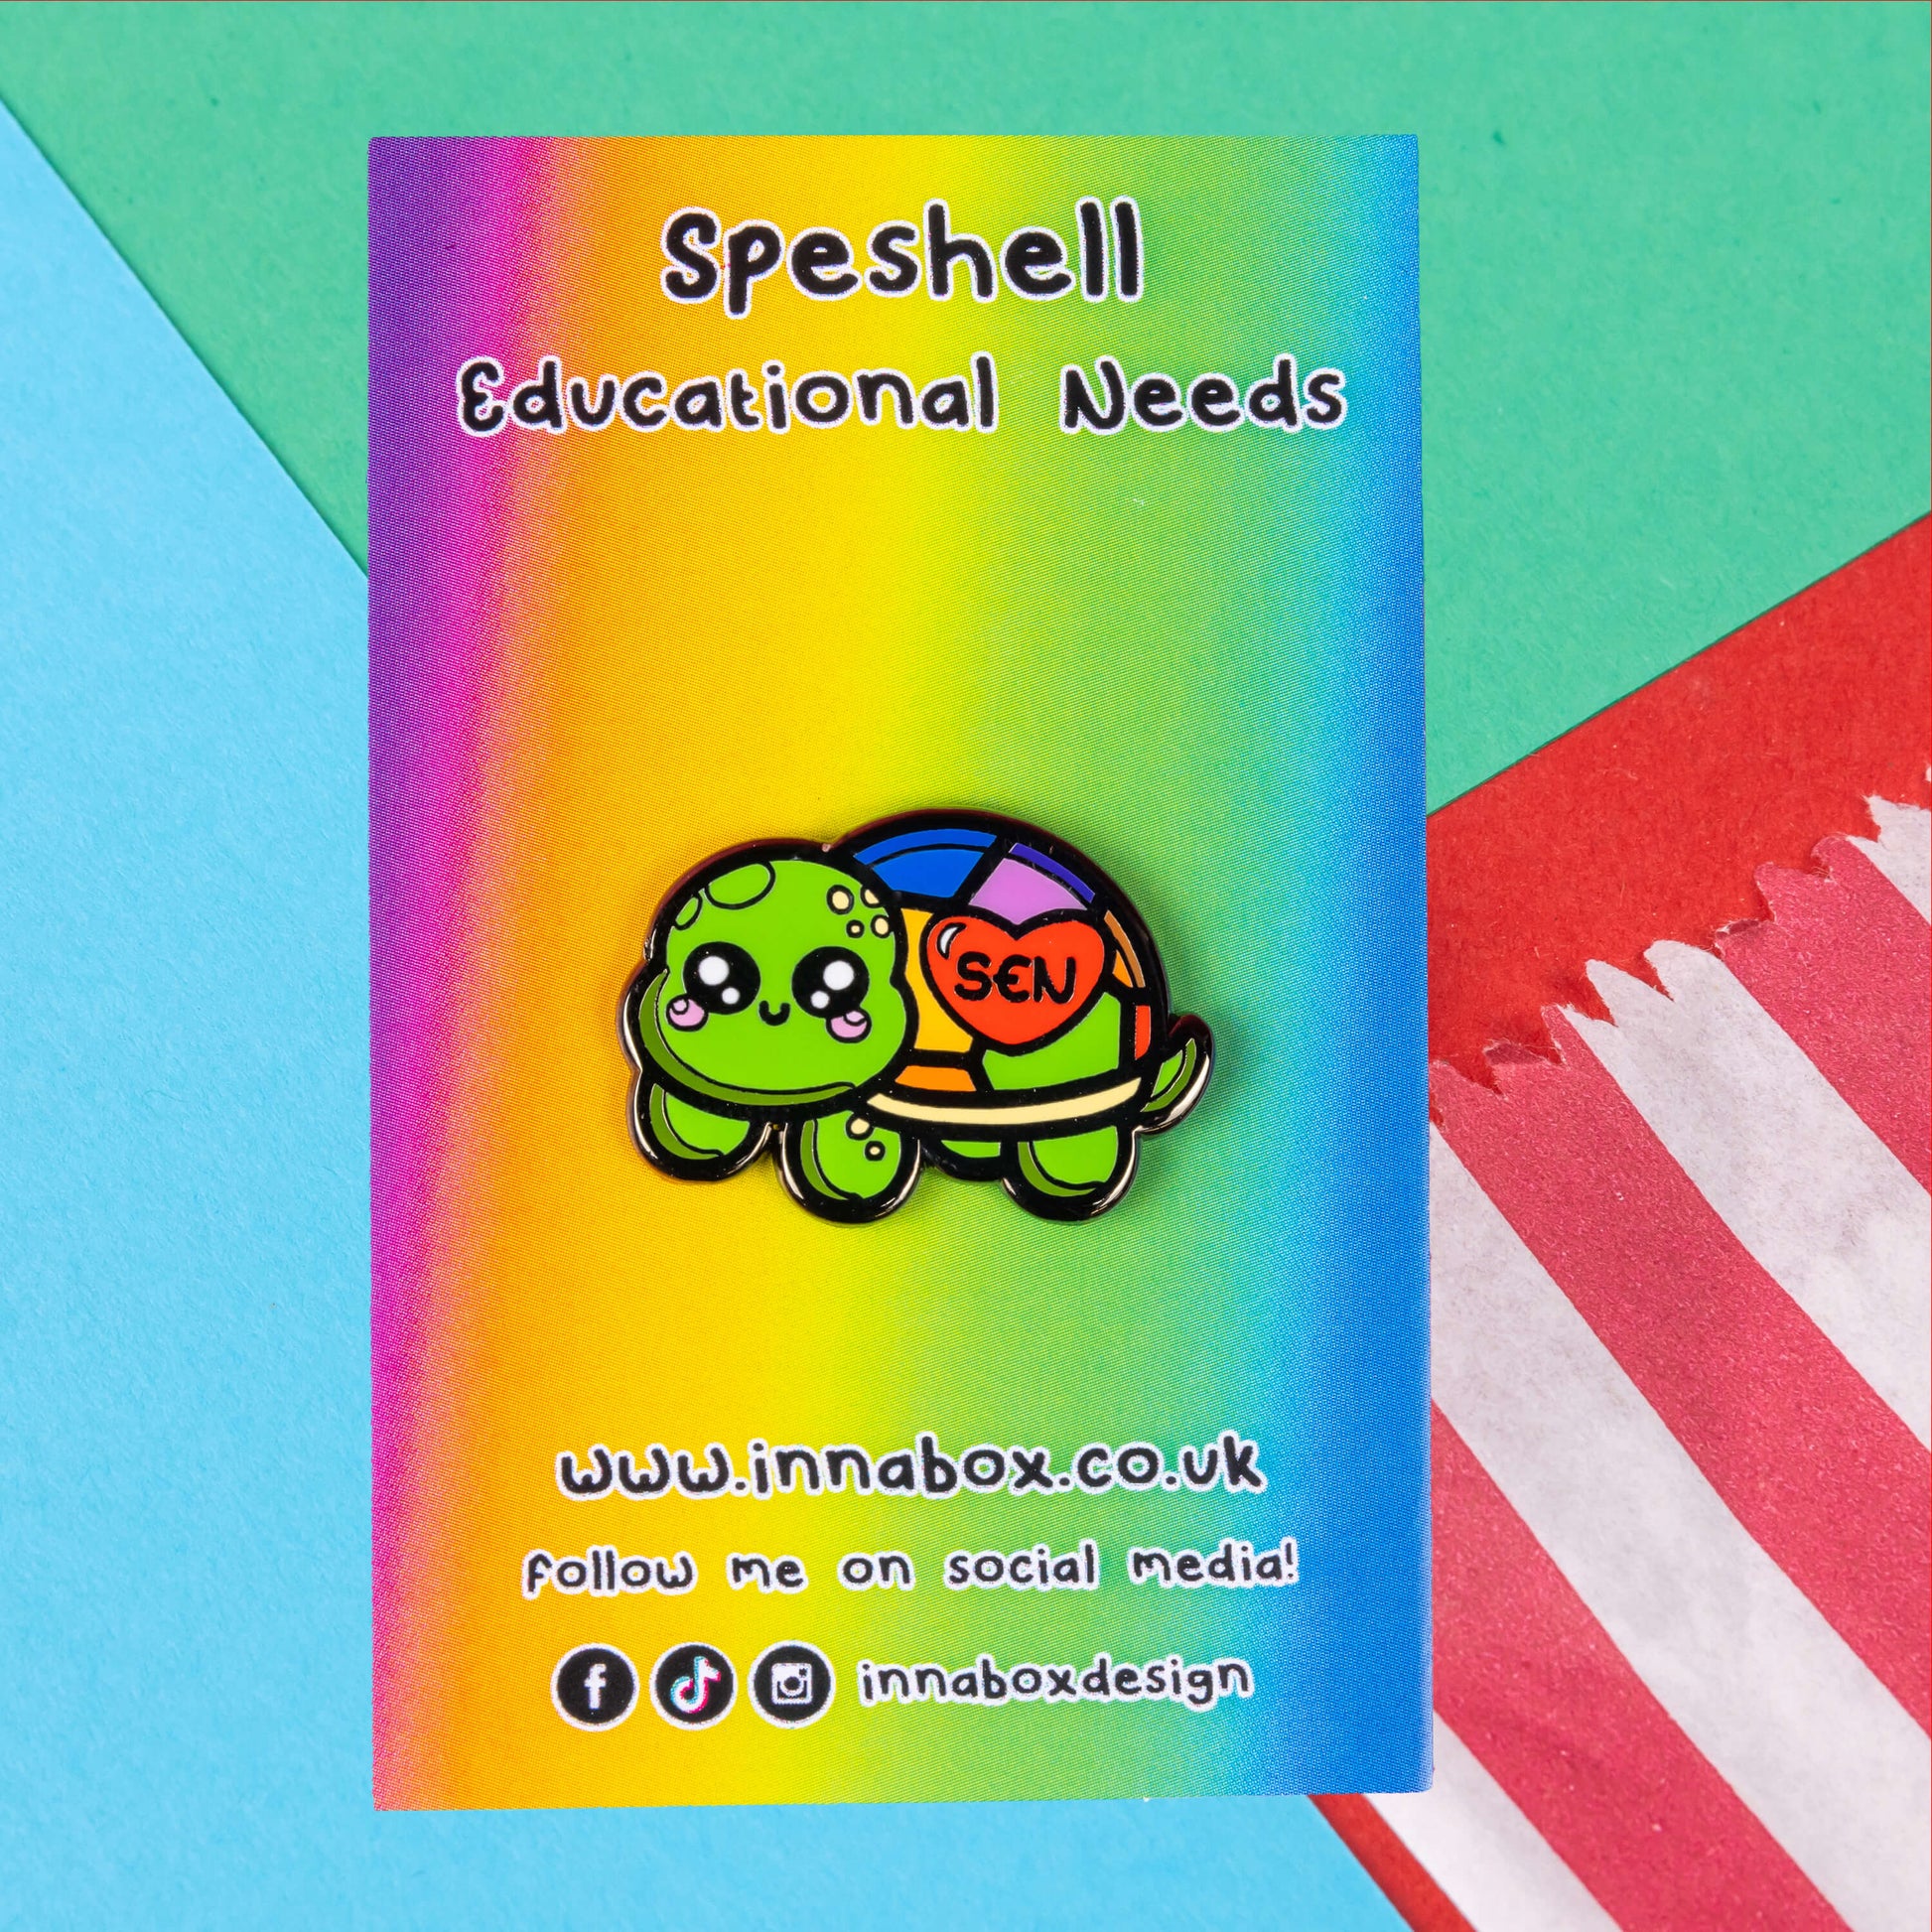 The Speshell Educational Needs Enamel Pin - SEN - Special Educational Needs on a rainbow backing card with black text. A rainbow shell kawaii cute style tortoise with pink cheeks and sparkling eyes, on its shell is a red heart with 'SEN' in the middle. The pin design is raising awareness for SEN Special Educational Needs.